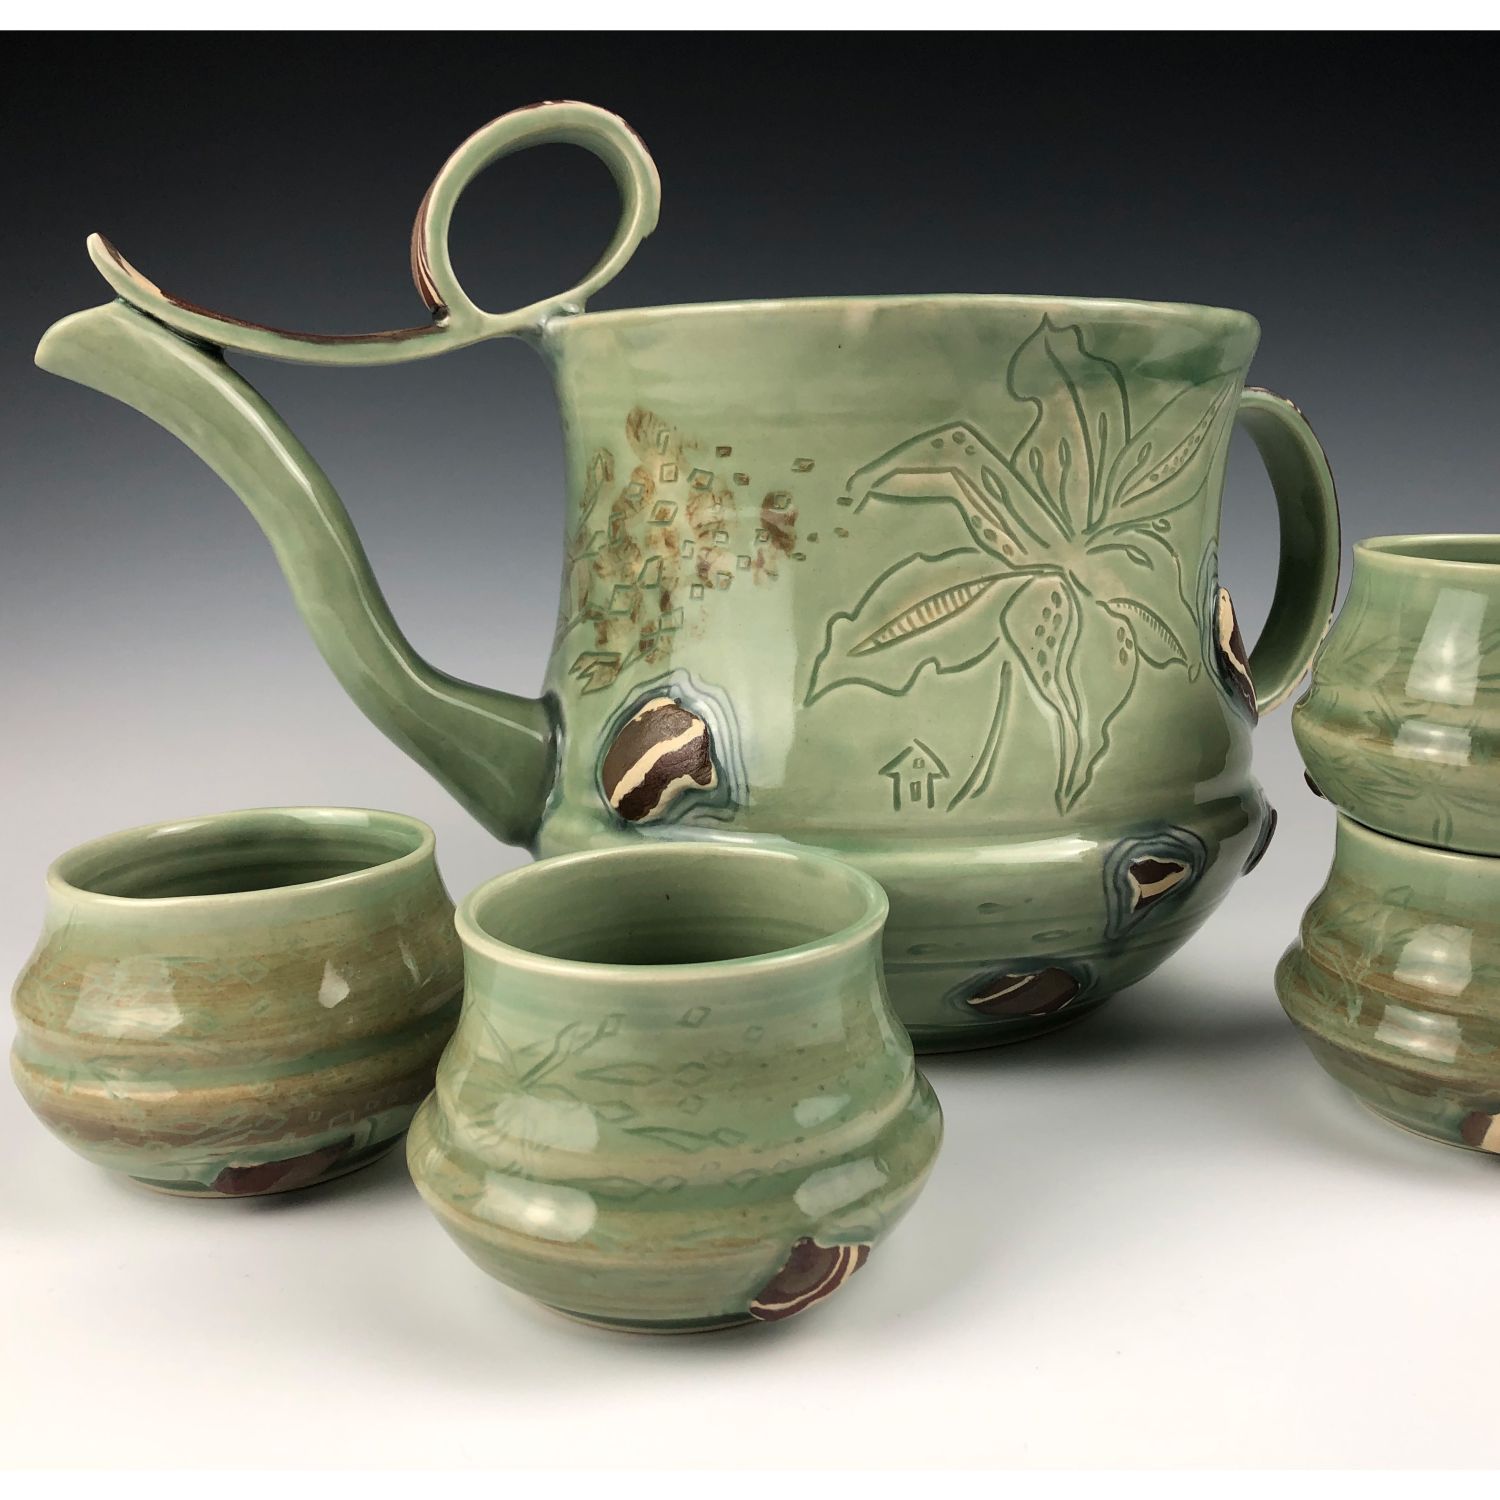 Kristina Rose Studios: Jug and Four Cups (Sold as a set of five) Product Image 1 of 6